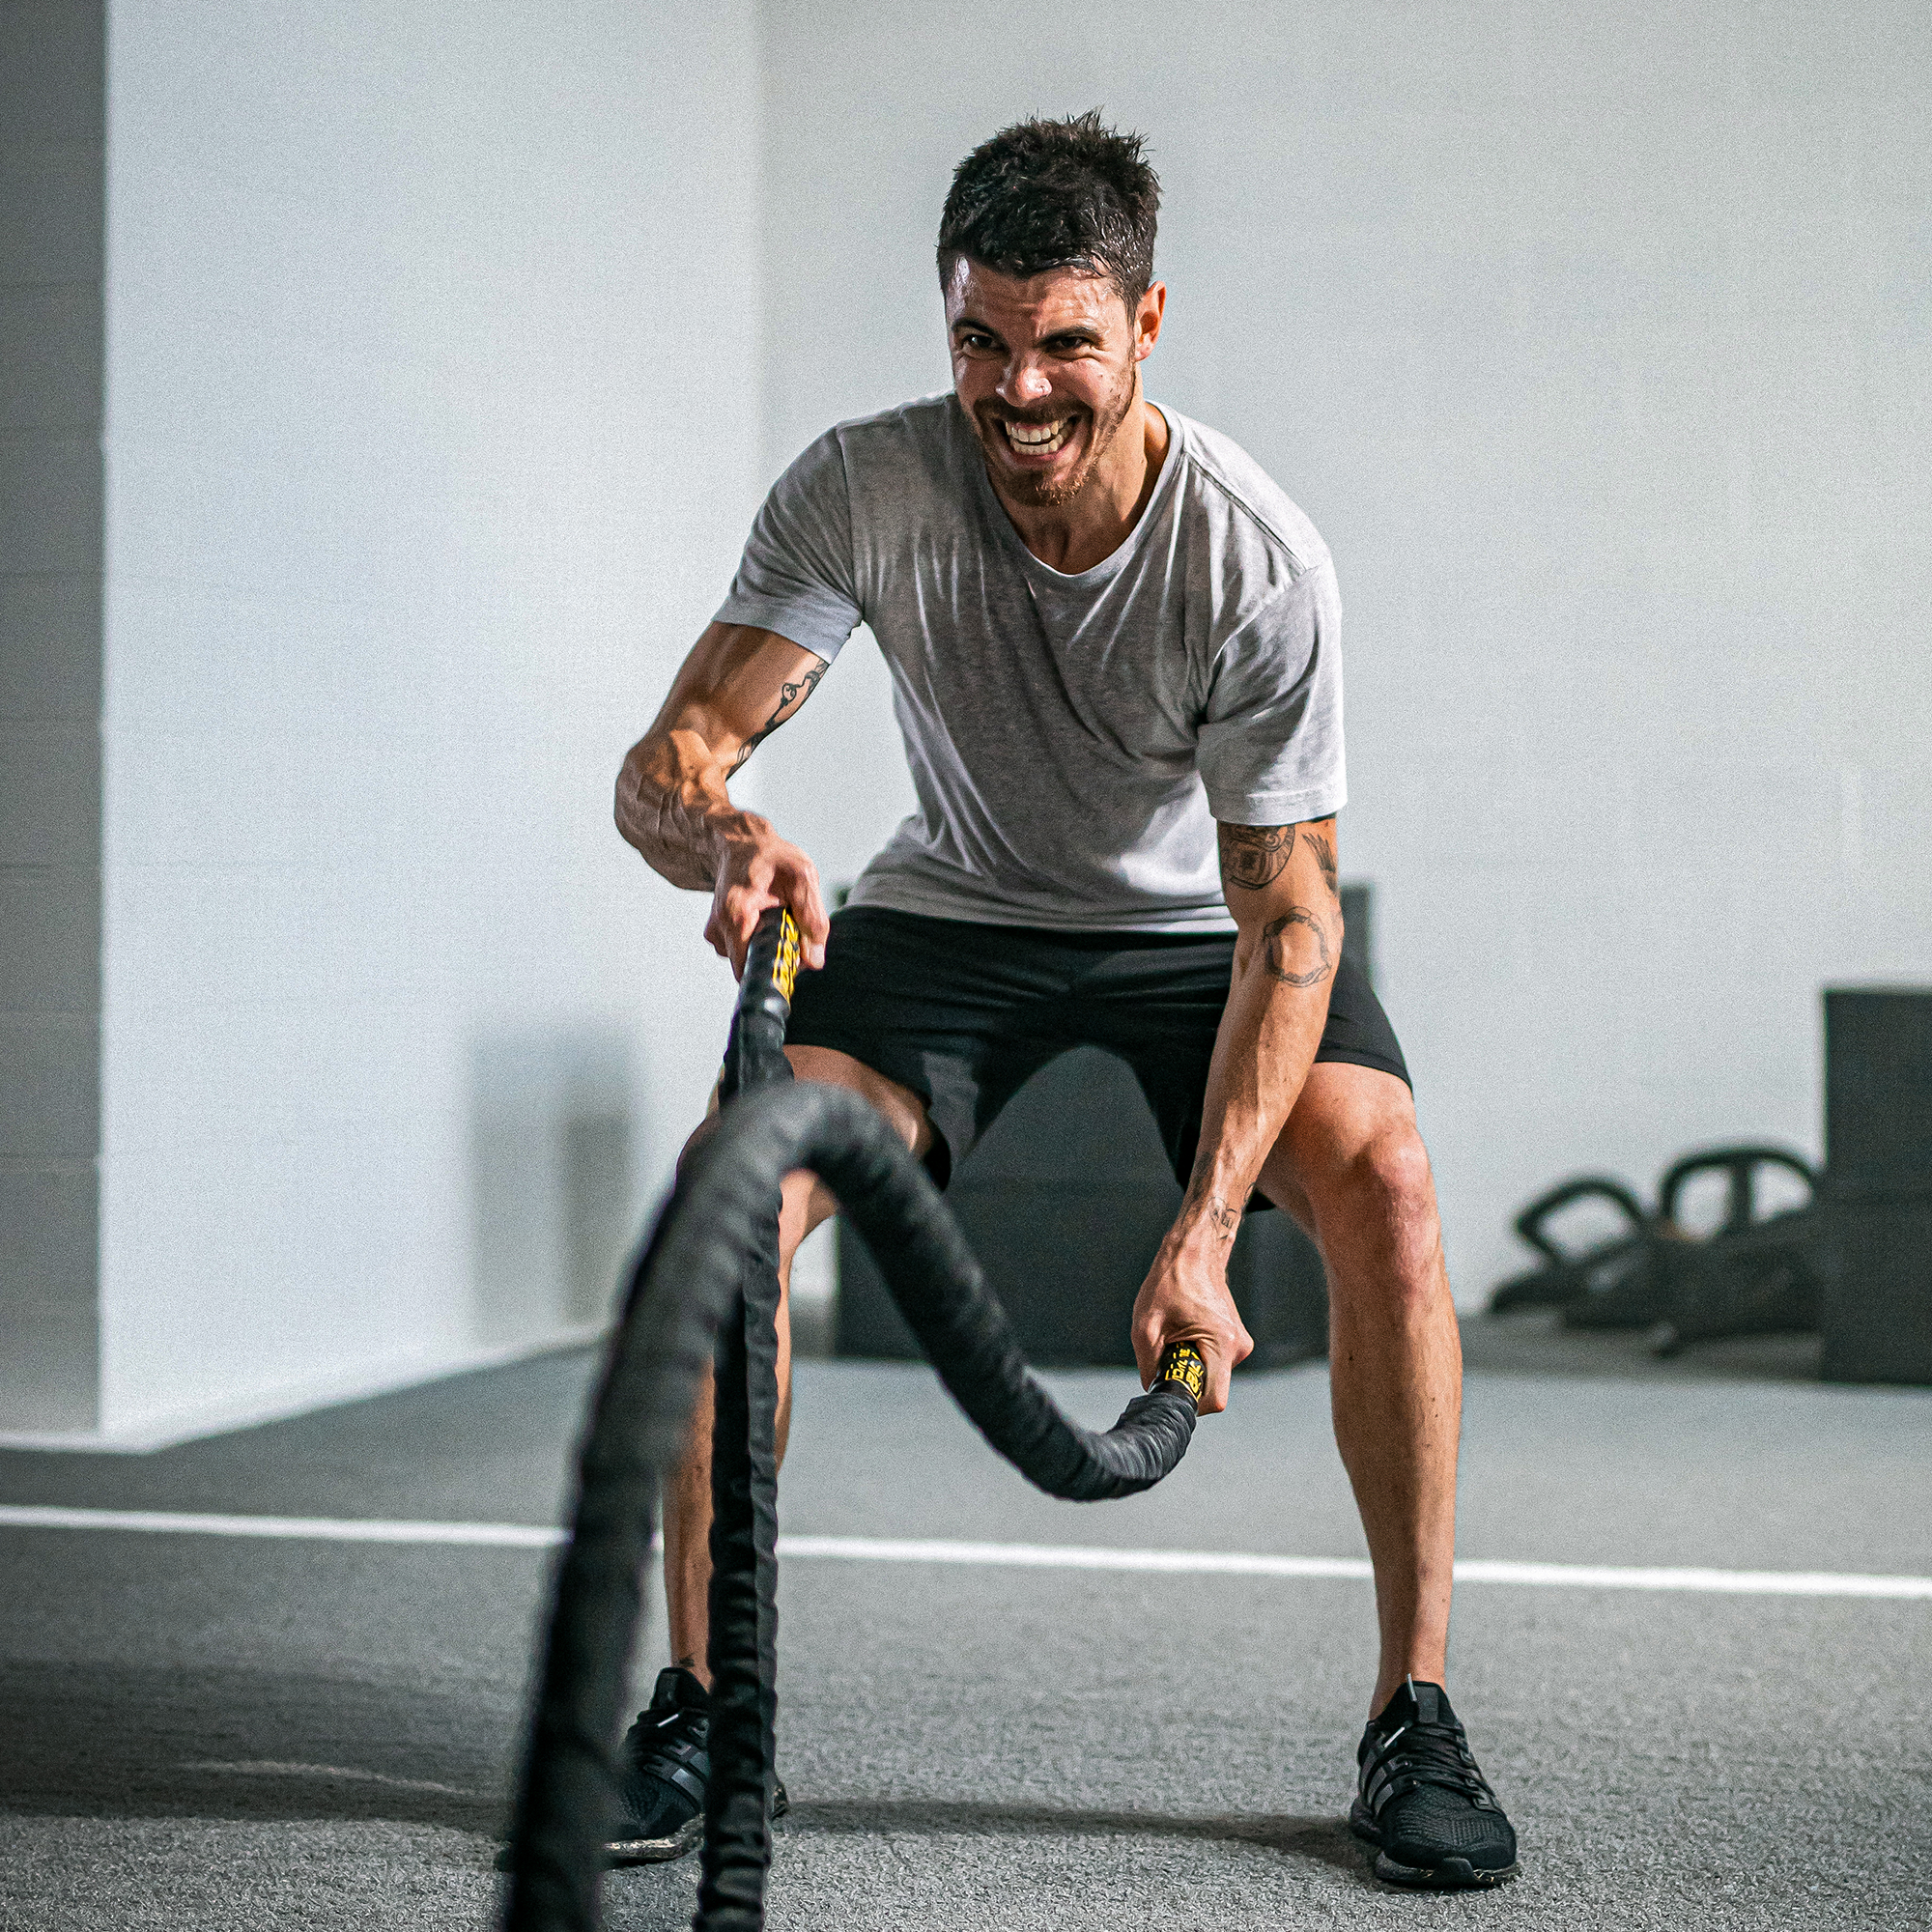 man in a gym doing battling ropes exercise